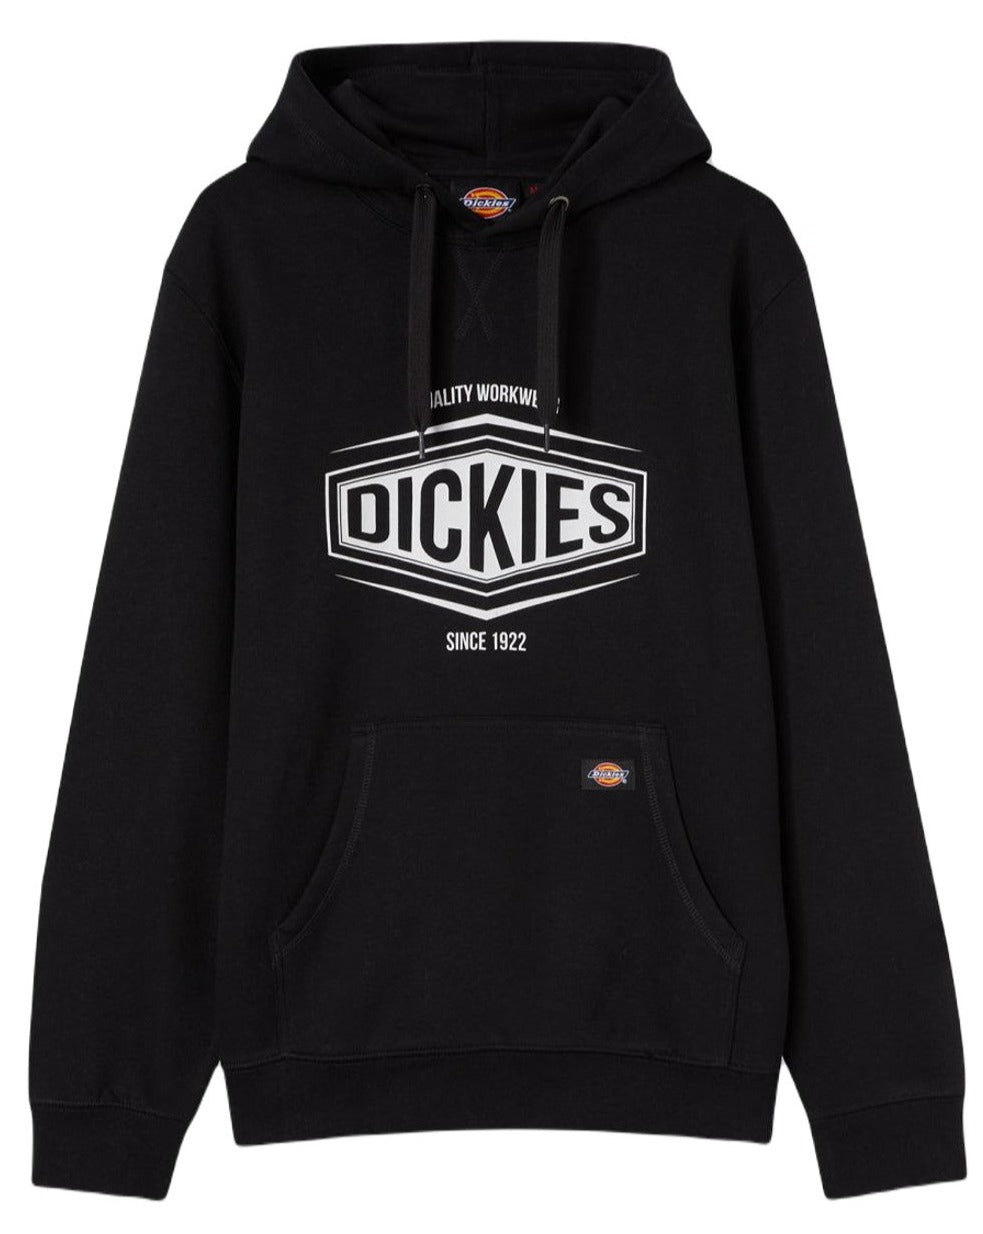 Clothing | for Go-To The Dickies Brand Workwear Reliable